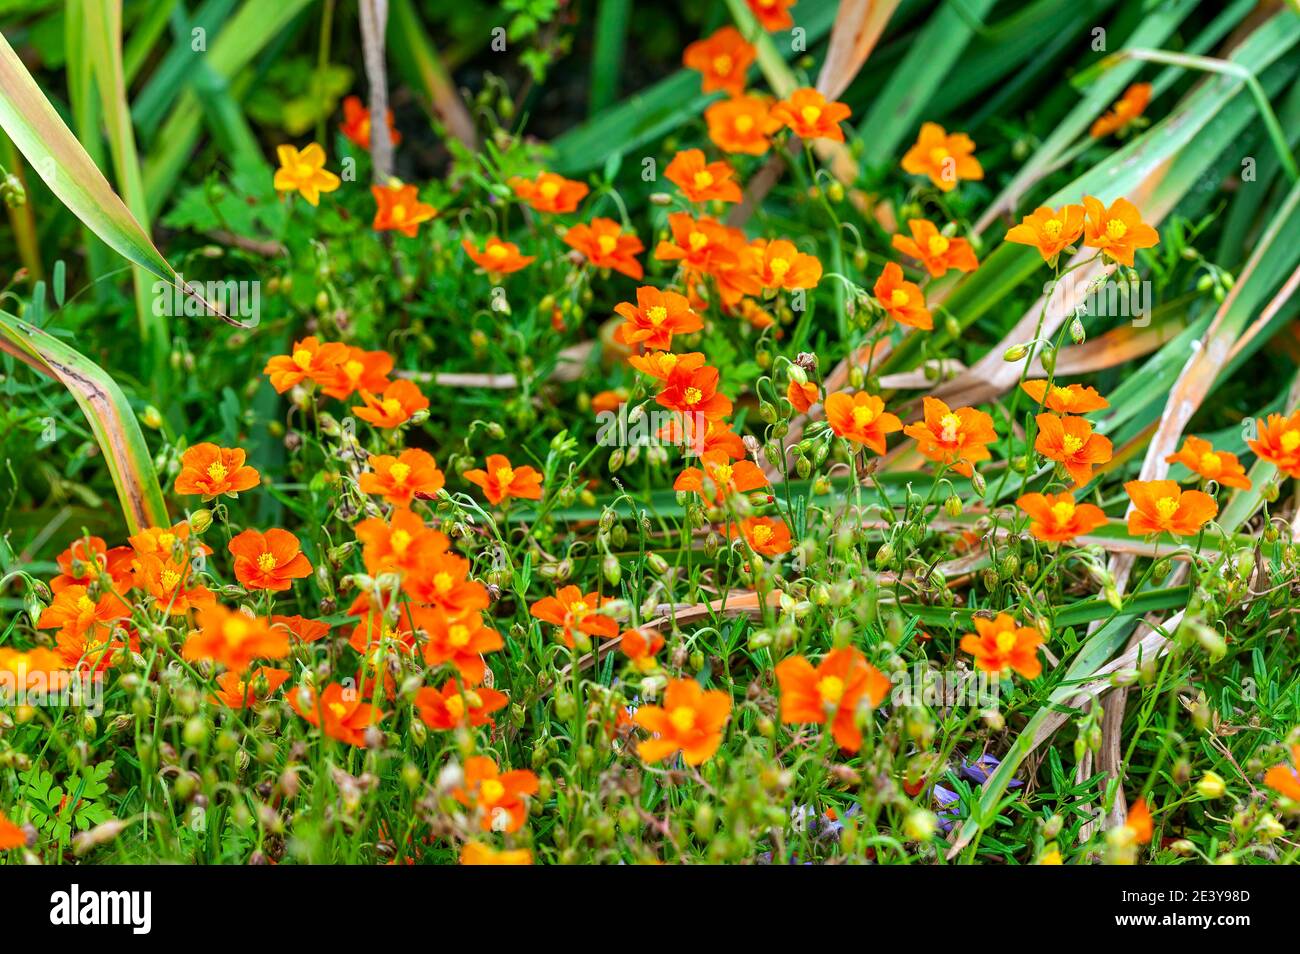 Helianthemum 'John Lanyon' an orange red herbaceous springtime summer flower plant commonly known as rock rose, stock photo image Stock Photo